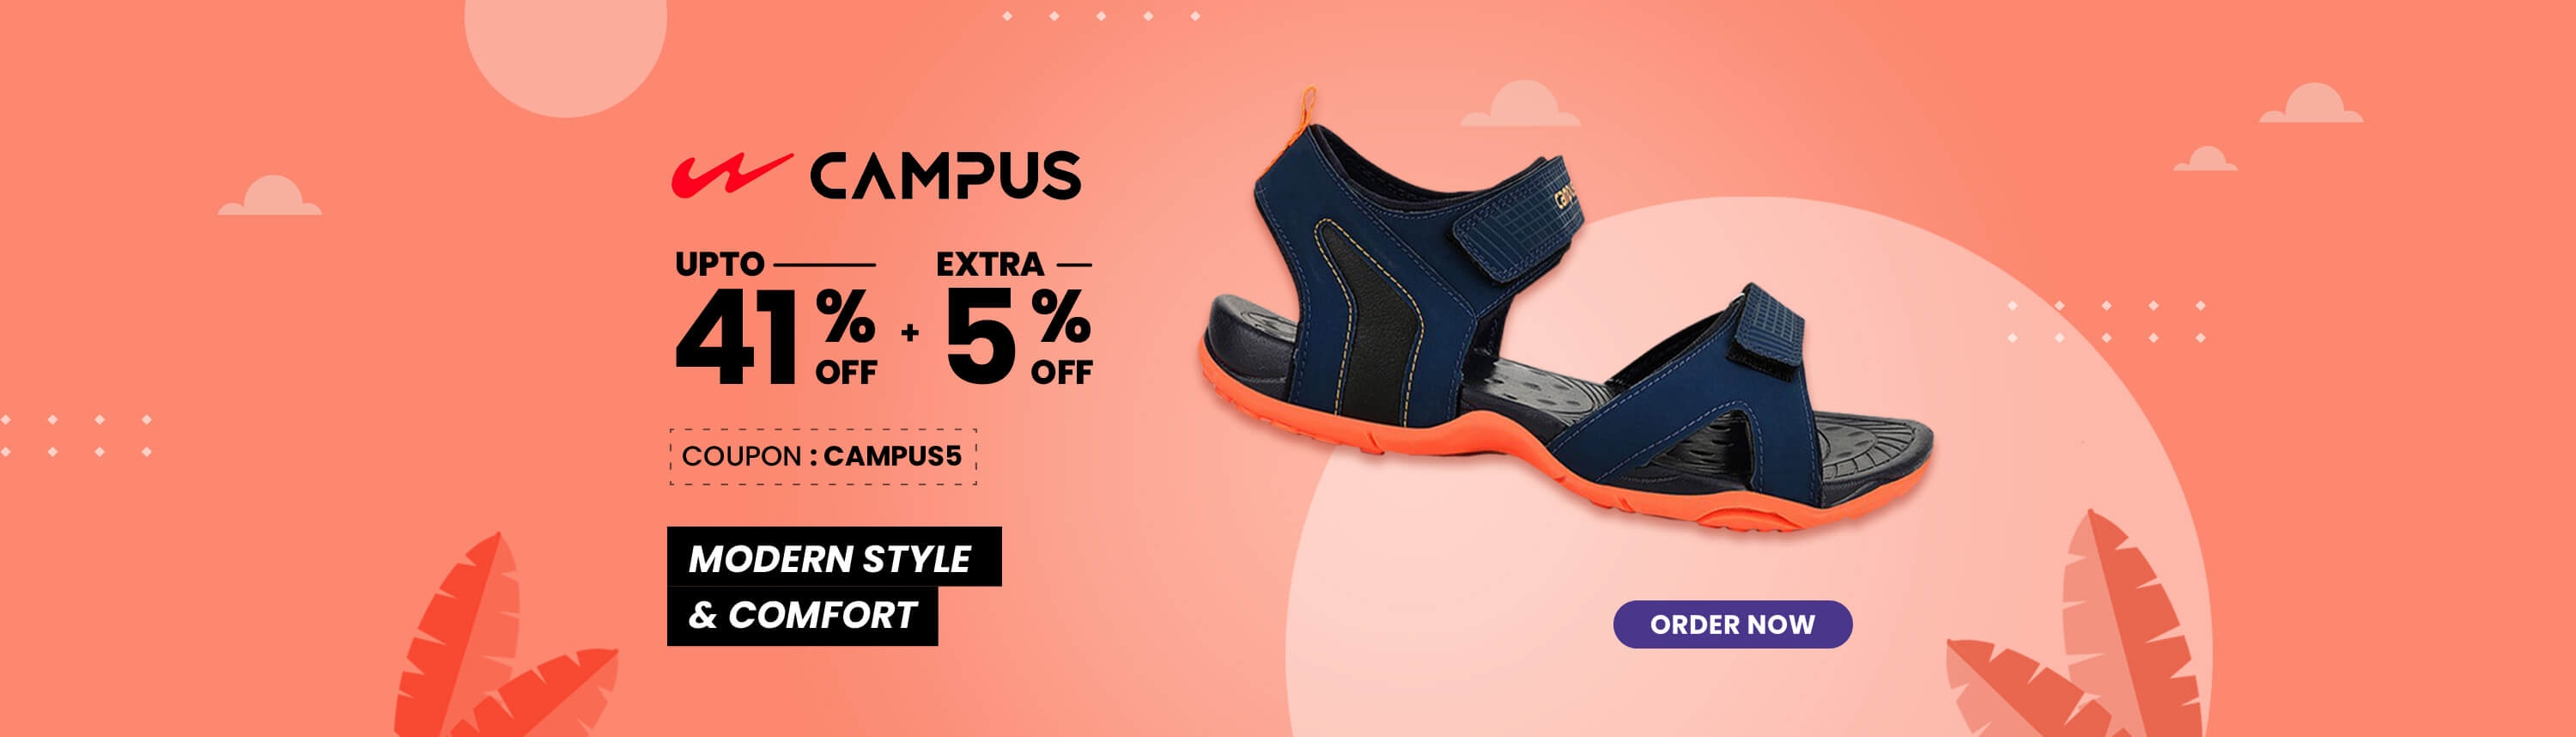 Campus Shoes upto 41% off + Extra 5% off Uniket